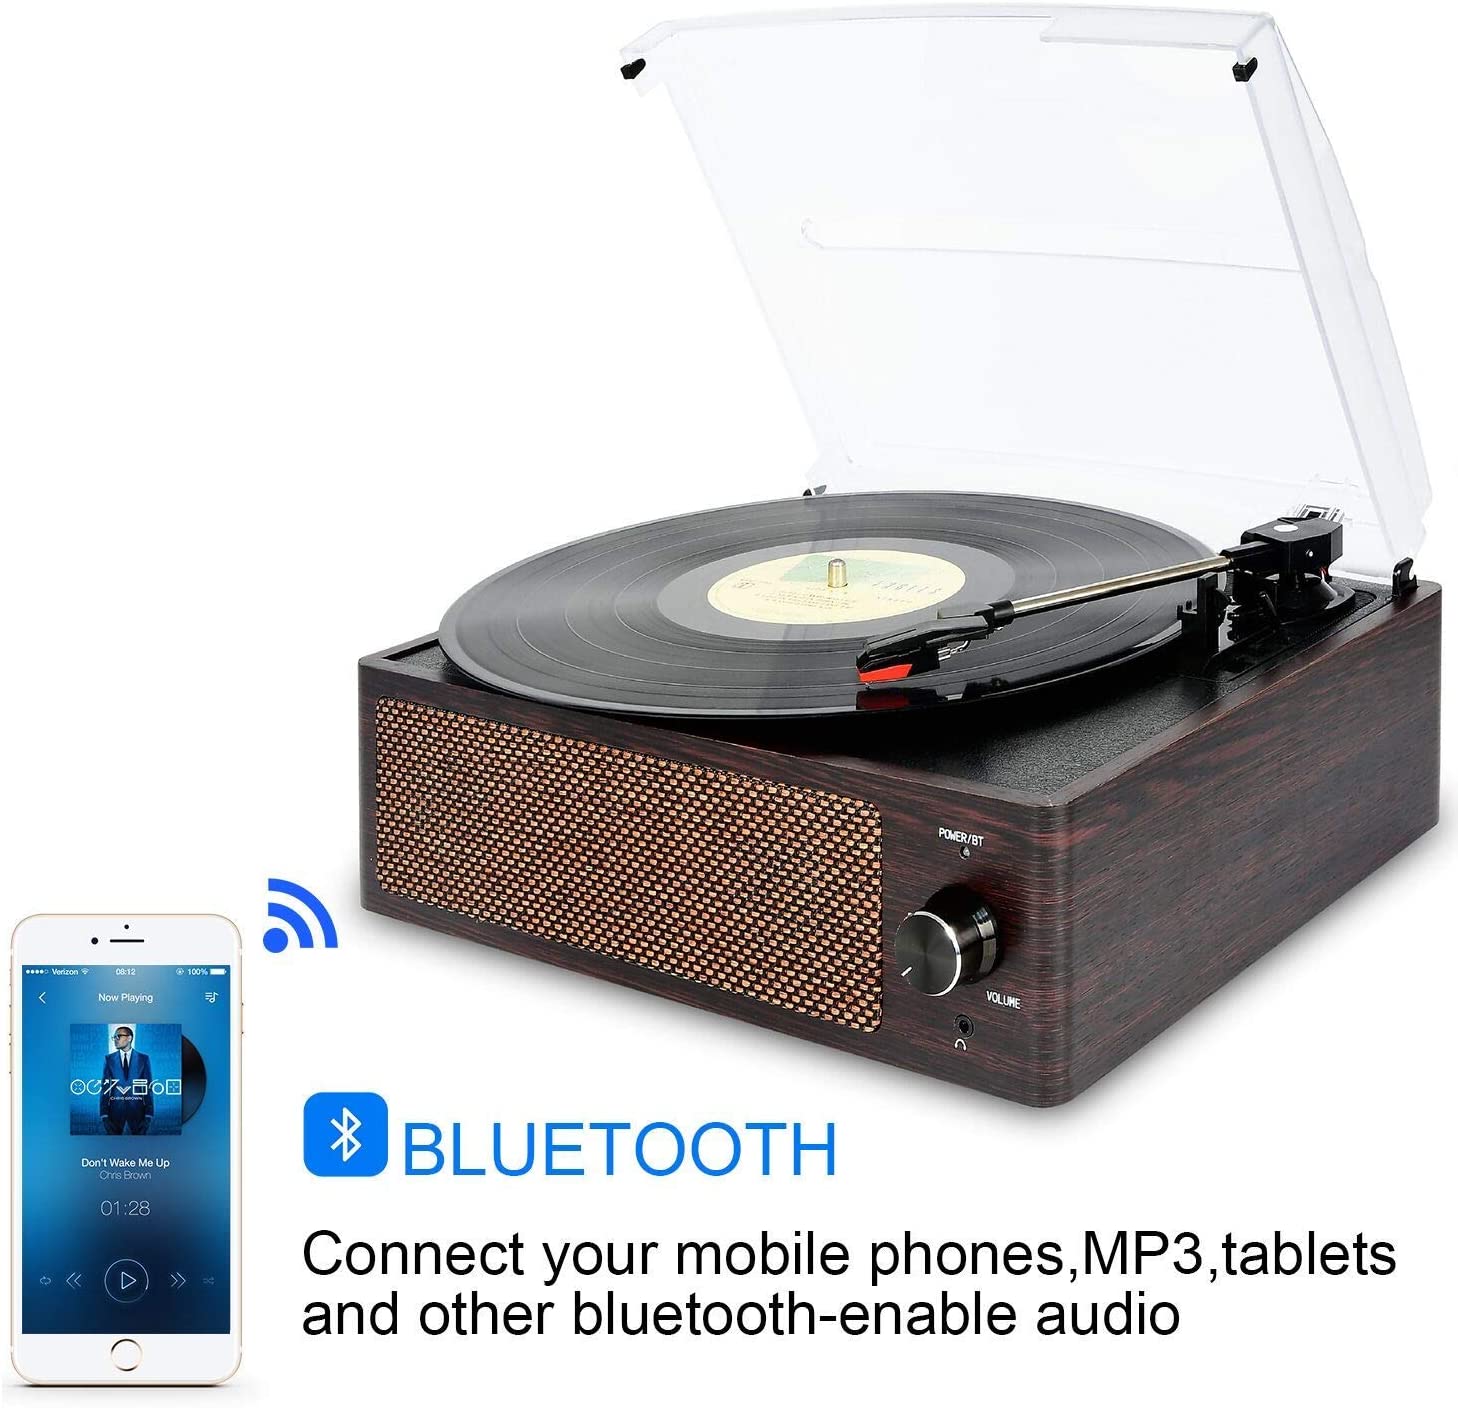 DIGITNOW Bluetooth Record Player Belt-Driven 3-Speed Turntable, Vintage Vinyl Record Players Built-in Stereo Speakers, with Headphone Jack/ Aux Input/ RCA Line Out, Brown Wooden